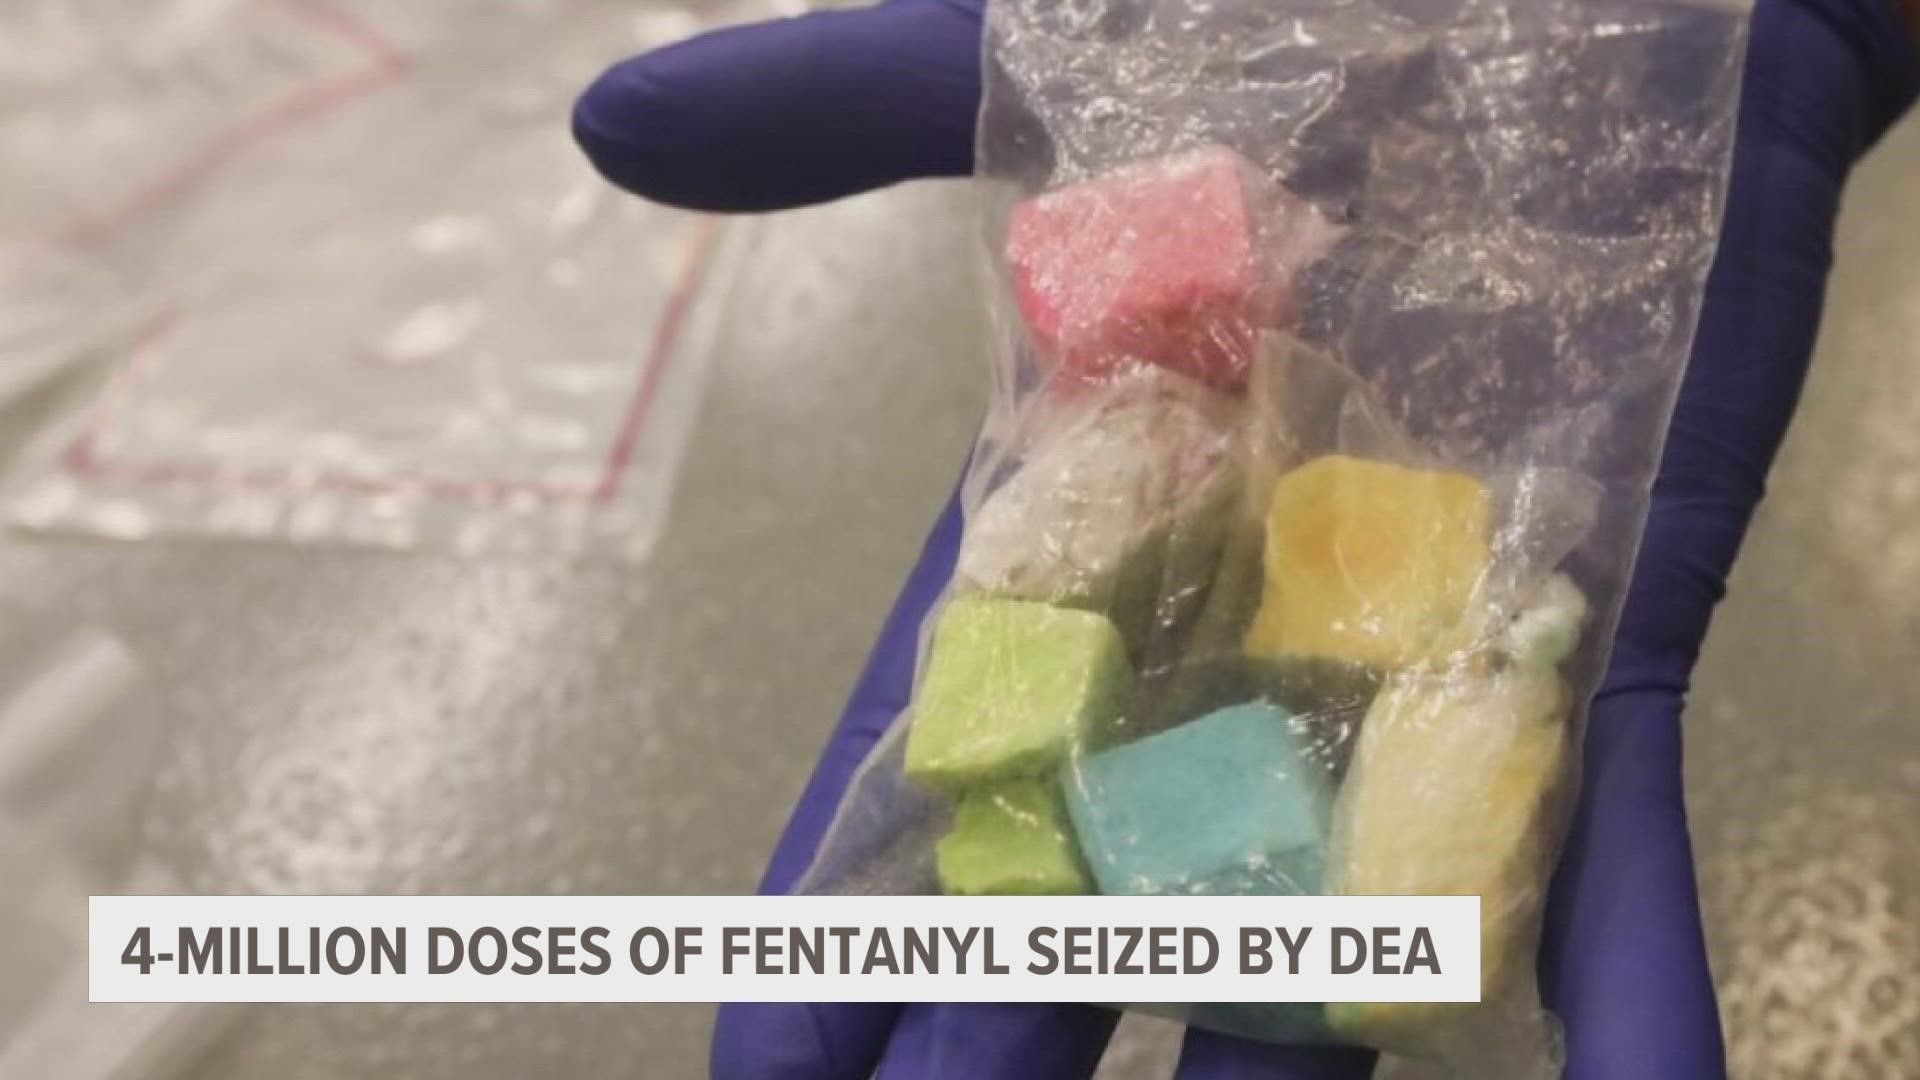 Law enforcement officials and the DEA focused on educating the community and getting counterfeit pills laced with fentanyl and fentanyl powder off the streets.